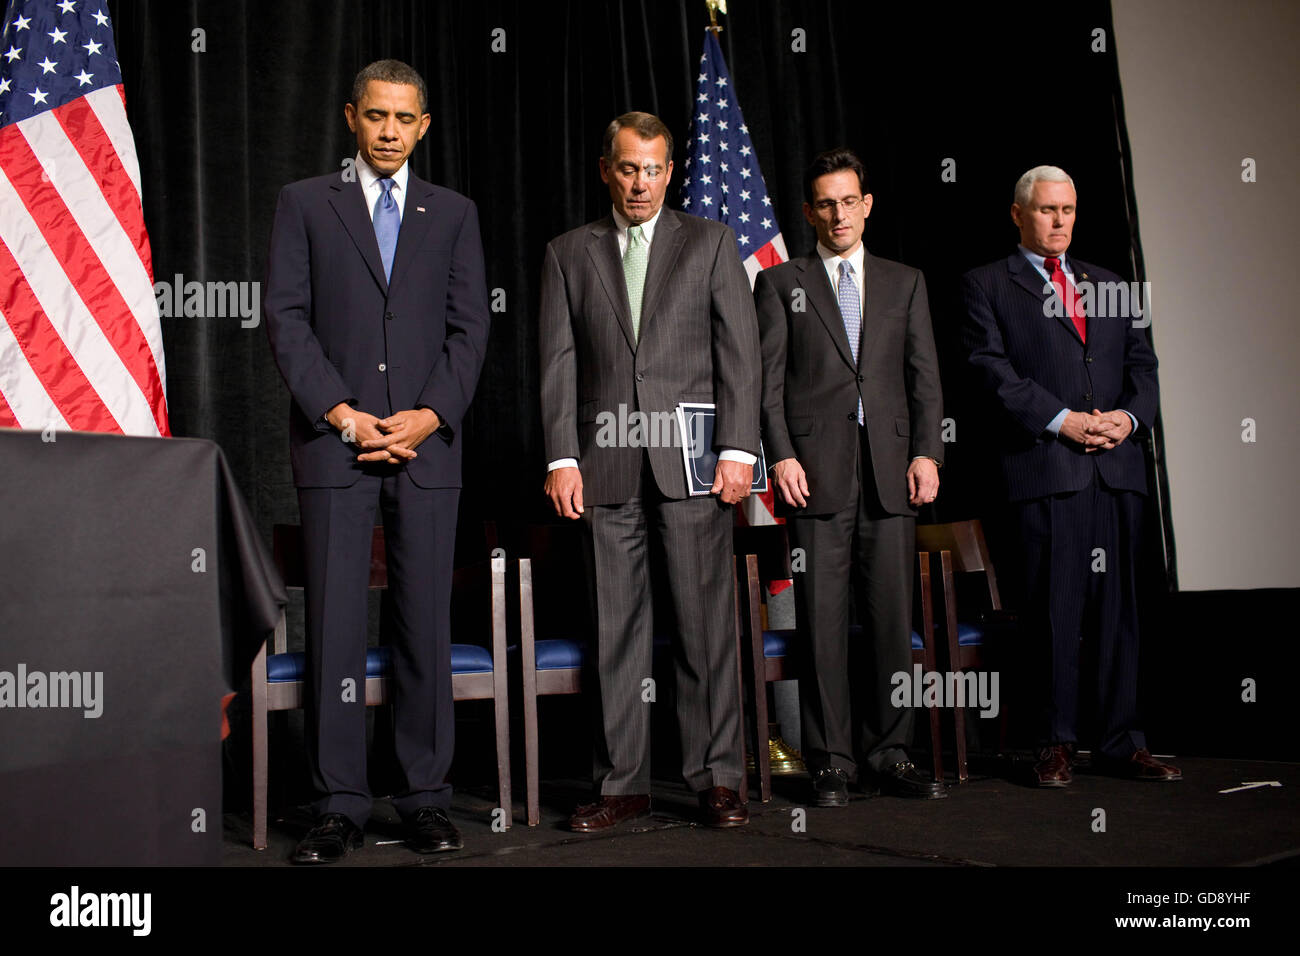 Baltimore, Maryland, USA. 29th Jan, 2010. United States President Barack Obama bows his head during the invocation at the nationally televised Republican House Issues Conference at the Renaissance Baltimore Harborplace Hotel in Baltimore, Maryland, January 29, 2010. With the President on-stage, from left, are US House Republican leader John Boehner (Republican of Ohio), US House Republican Whip Eric Cantor (Republican of Virginia) and Chair of the US House Republican Conference Mike Pence (Republican of Indiana). Mandatory Credit: Pete Souza/White House via CNP (Cre Stock Photo